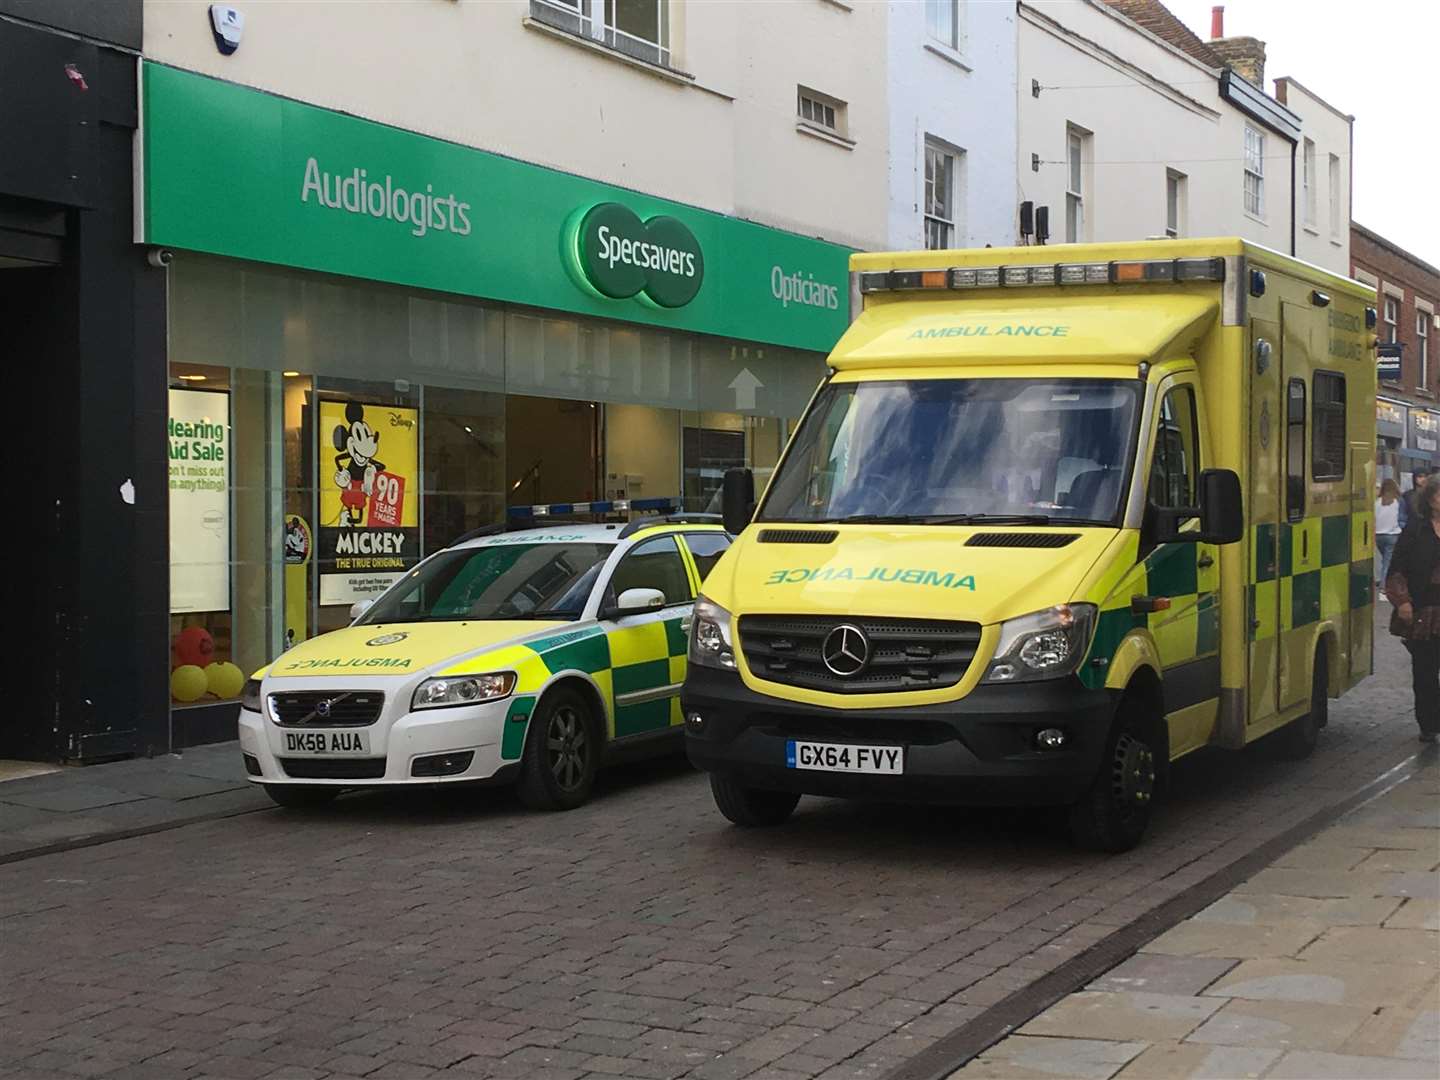 South East Coast Ambulance Service responded to Week Street in Maidstone. (4890528)